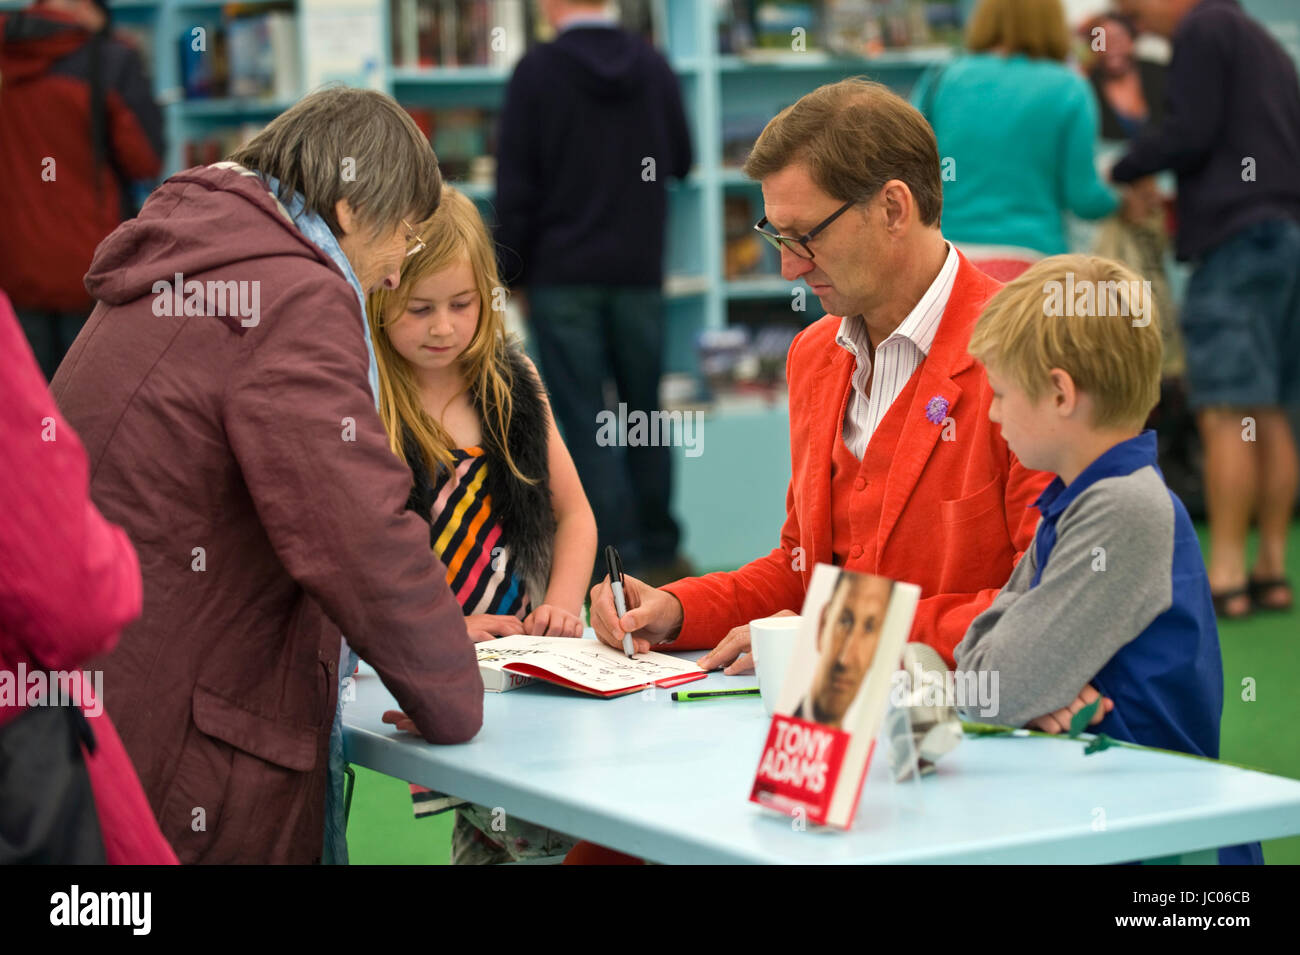 Tony Adams former Arsenal & England footballer signing books for fans in the bookshop at the annual Hay Festival of Literature and the Arts 2017 Hay-on-Wye Powys Wales UK Stock Photo